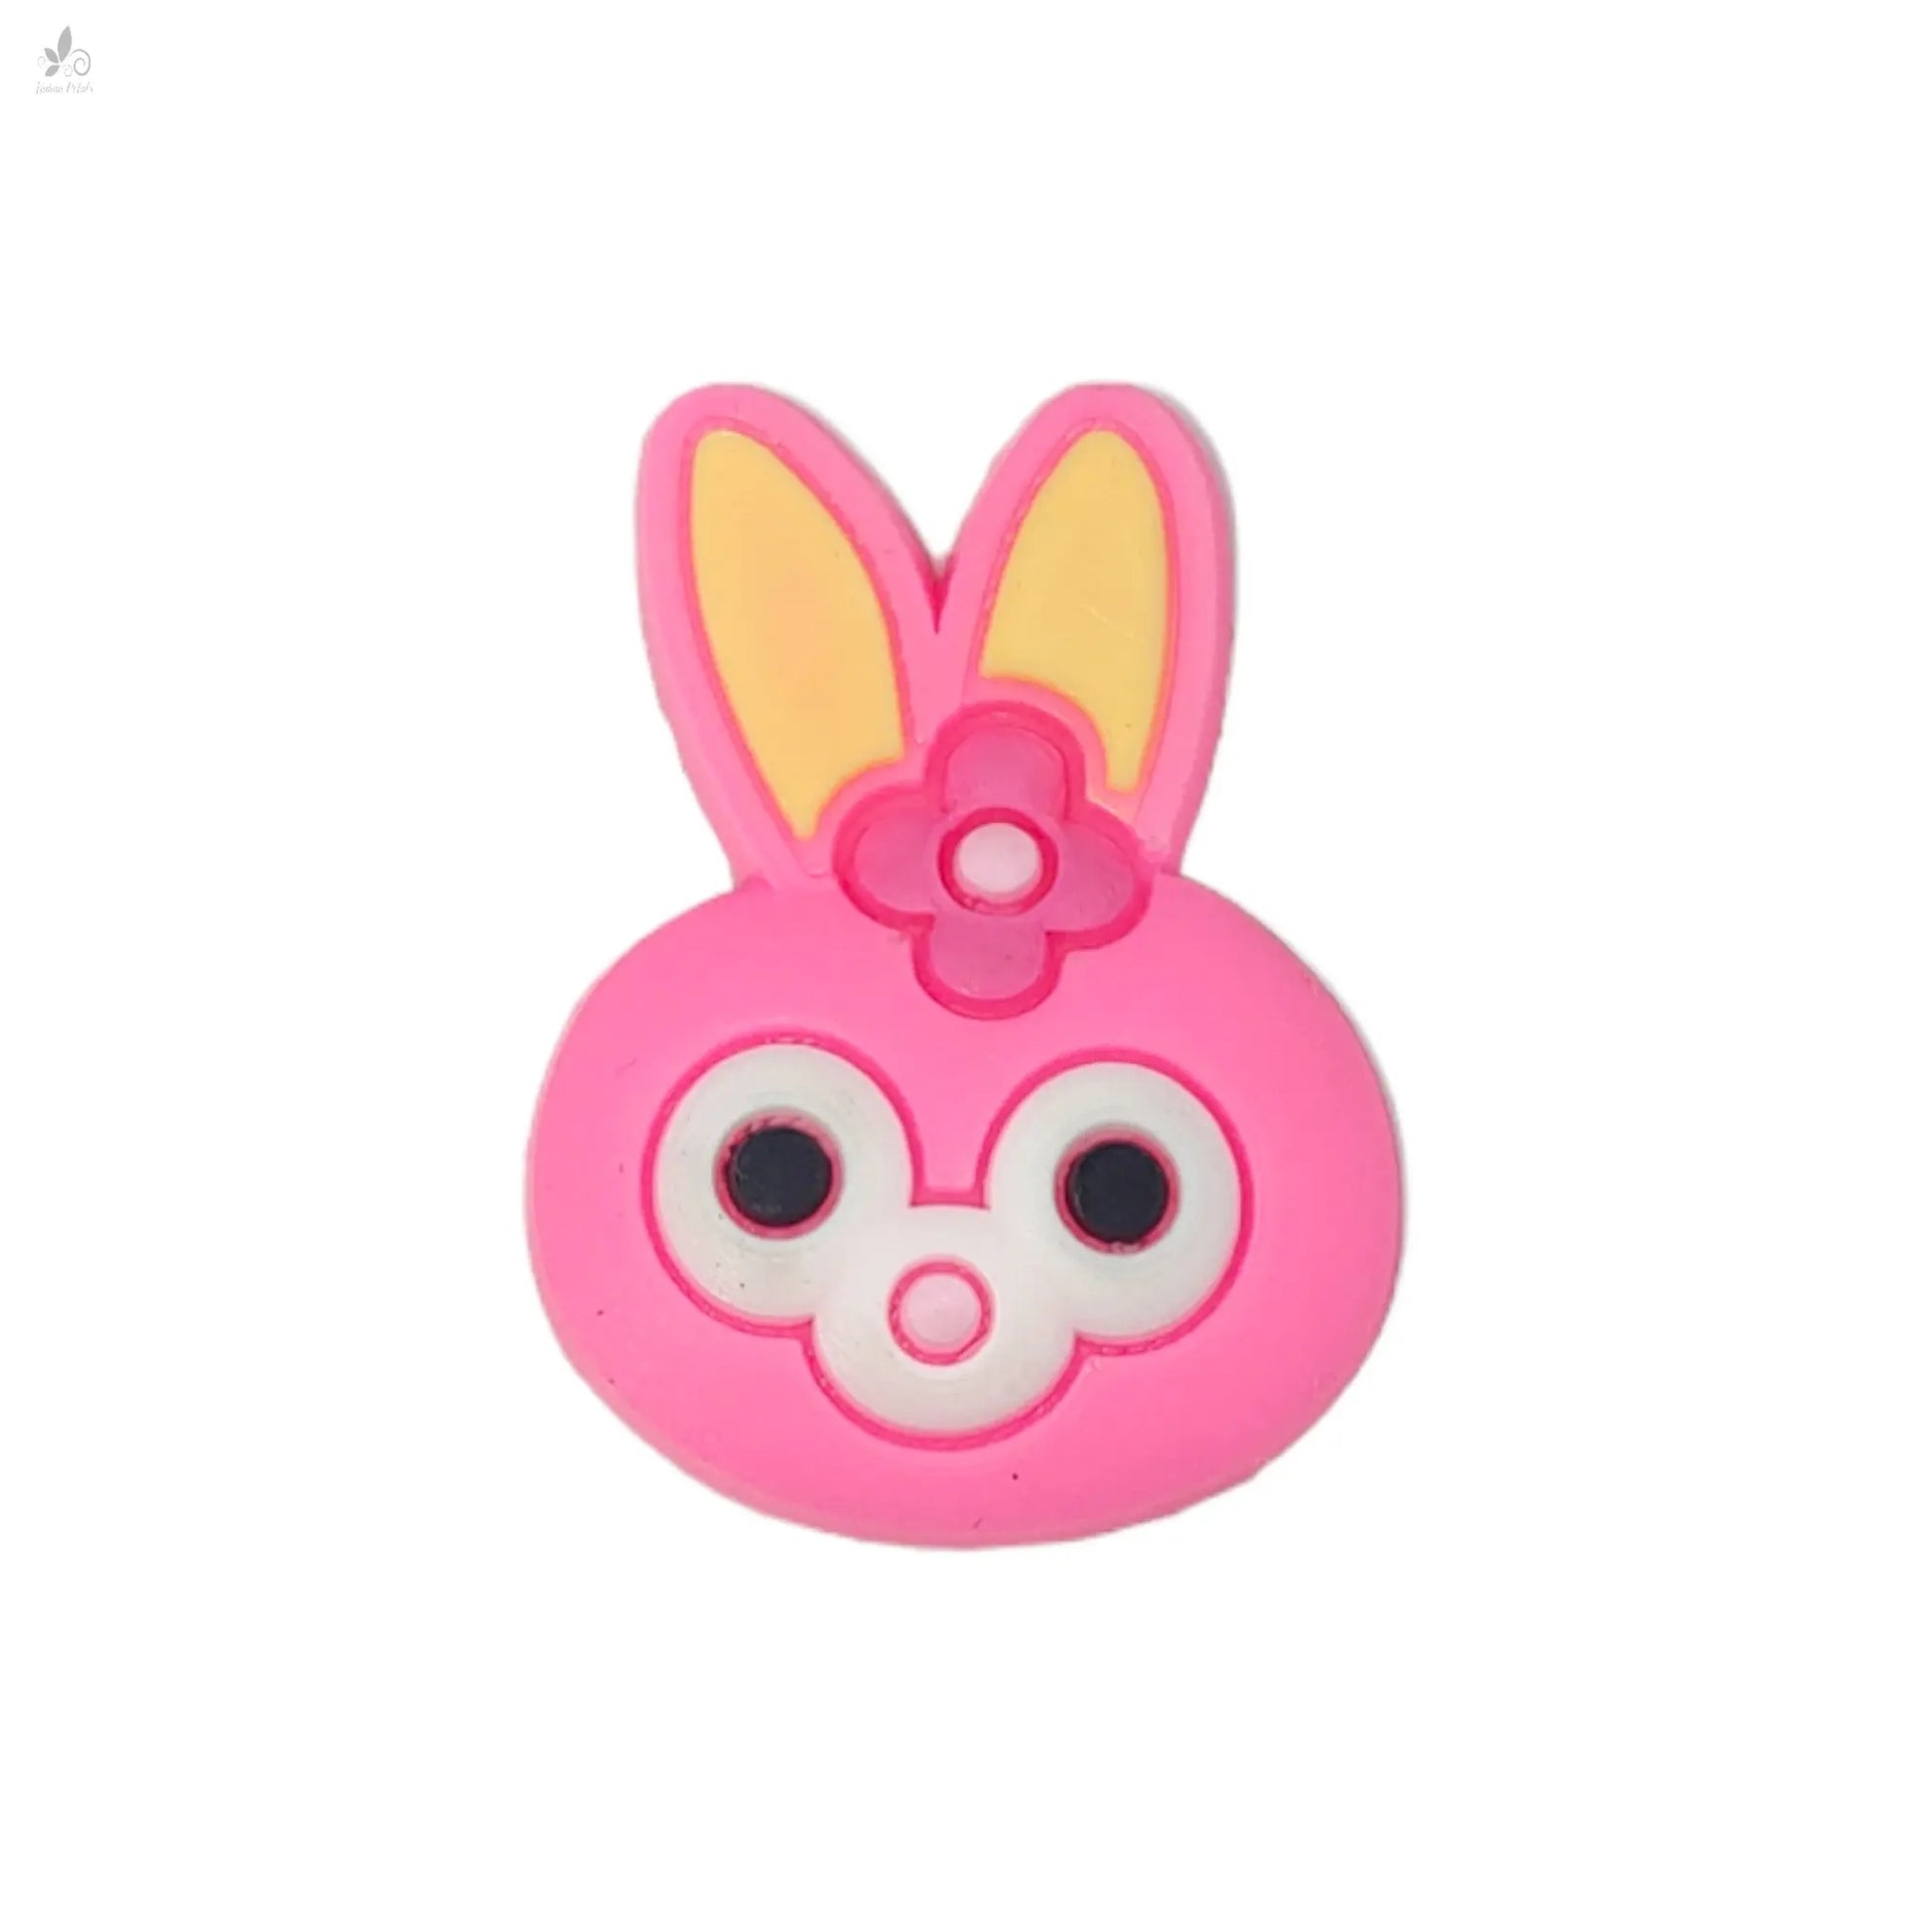 Bunny Face Soft Silicon Resin Motif for Craft or Decoration, 60 Pcs, Mix - 13542